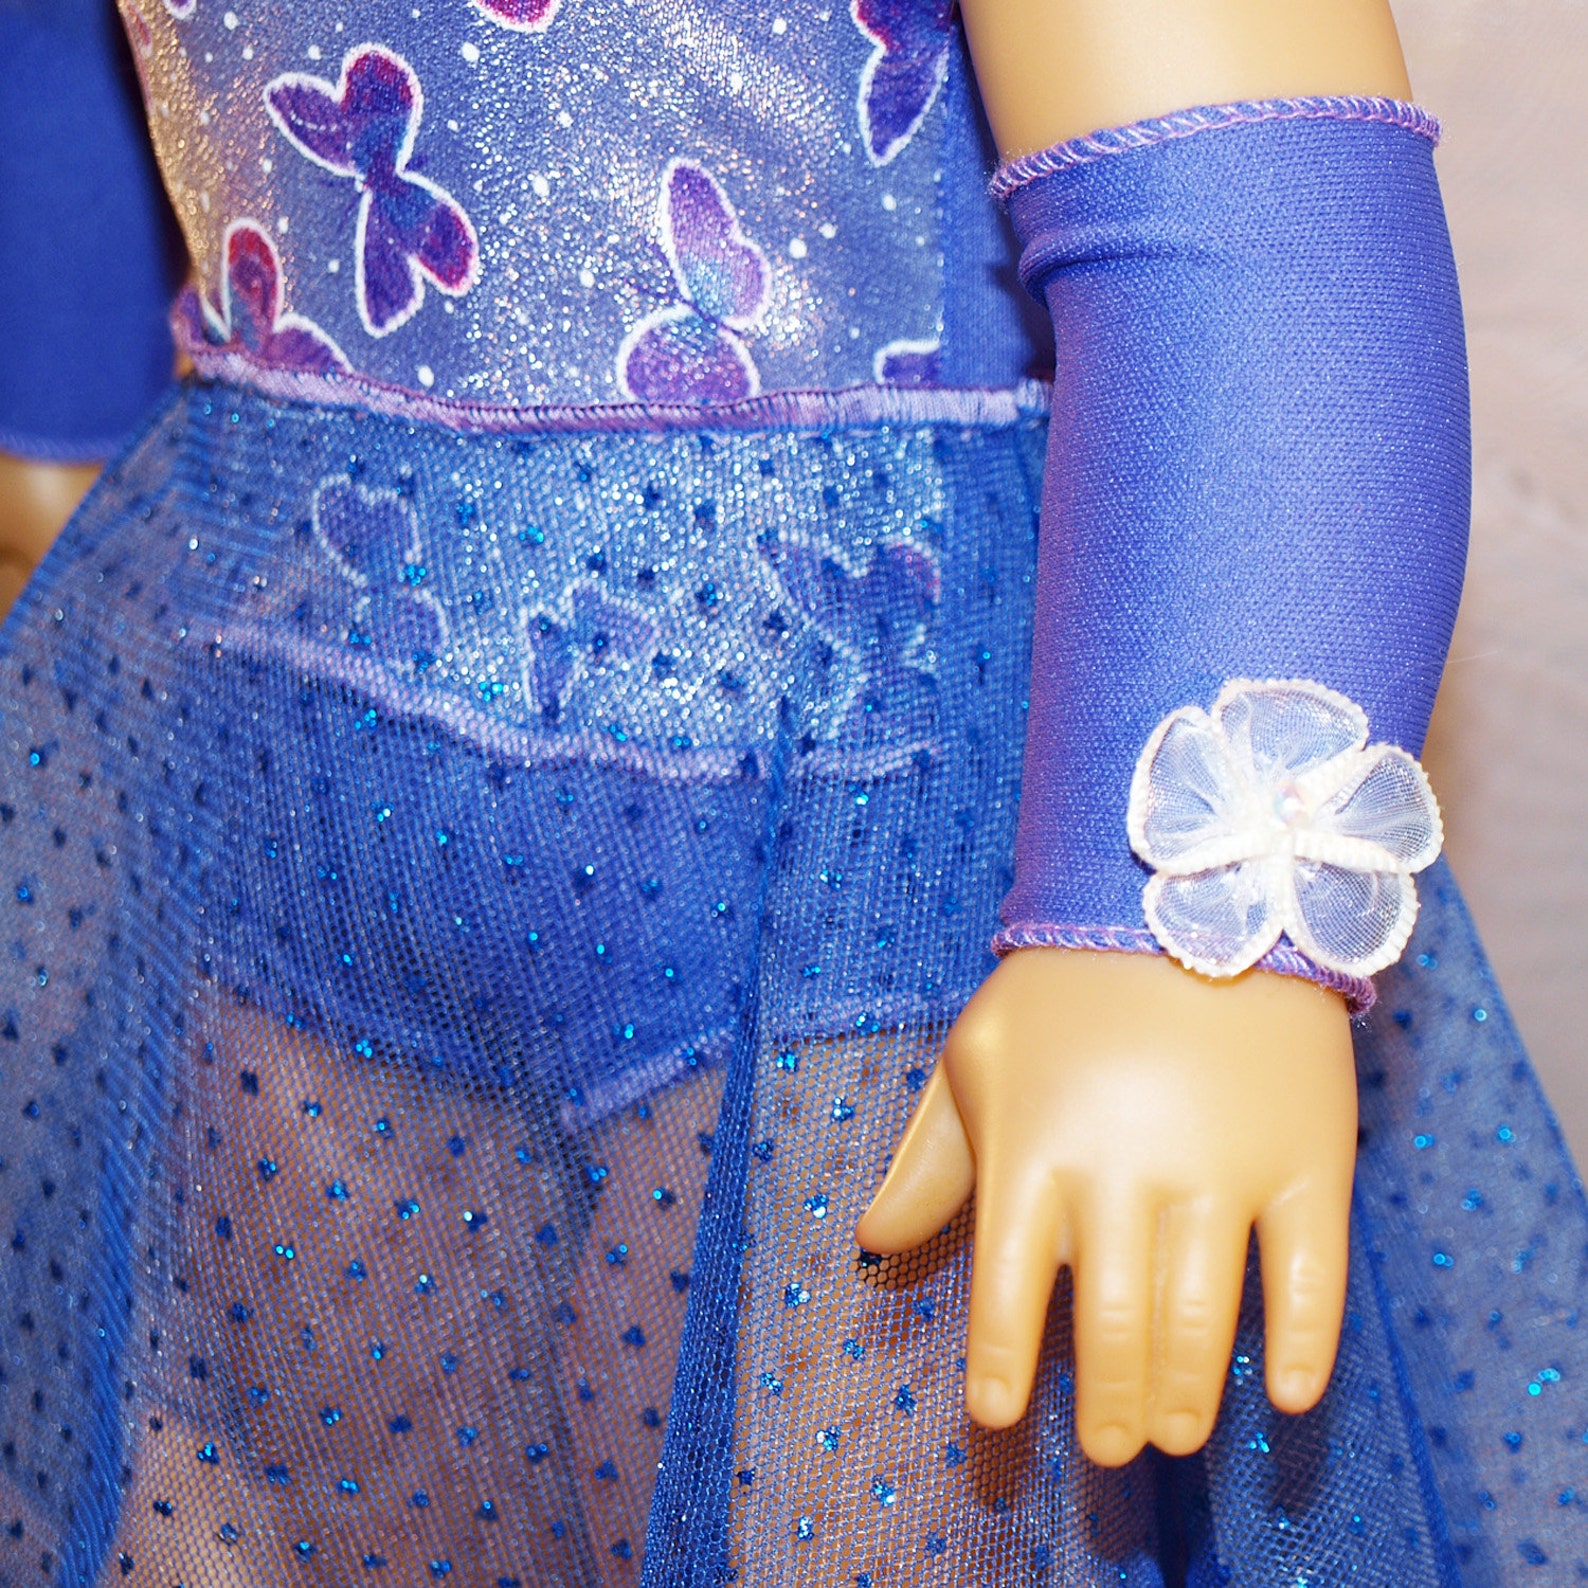 dance costume for ballet or lyrical in shades of purple with hair clip, armbands and shoes, modeled on american girl doll